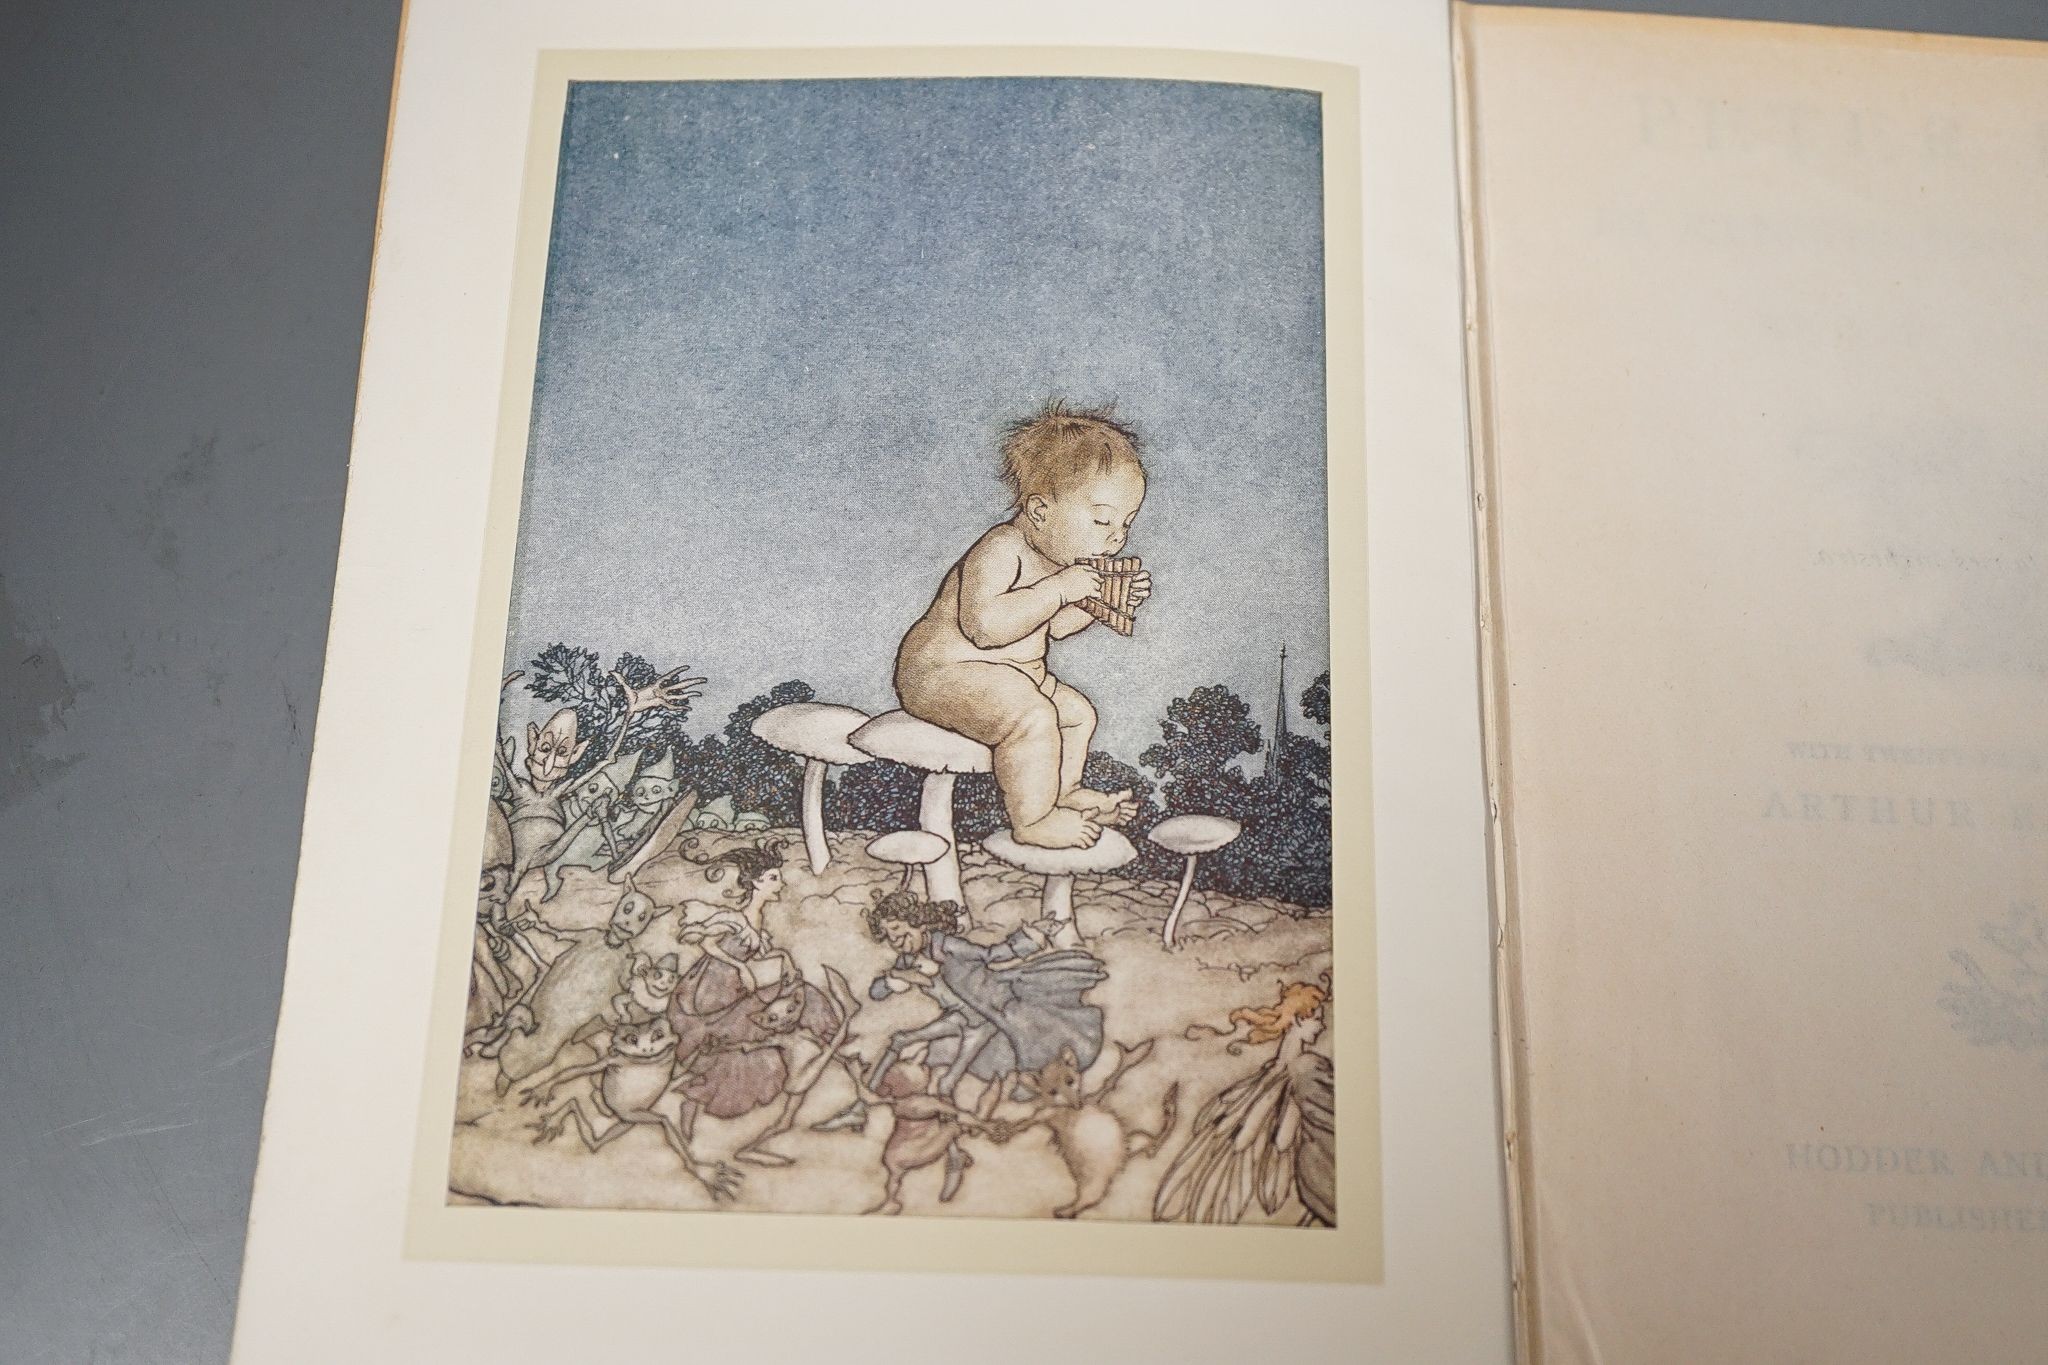 Barrie - Peter Pan, illustrated by Rackham, 8vo , with 24 colour plates, London, circa 1922